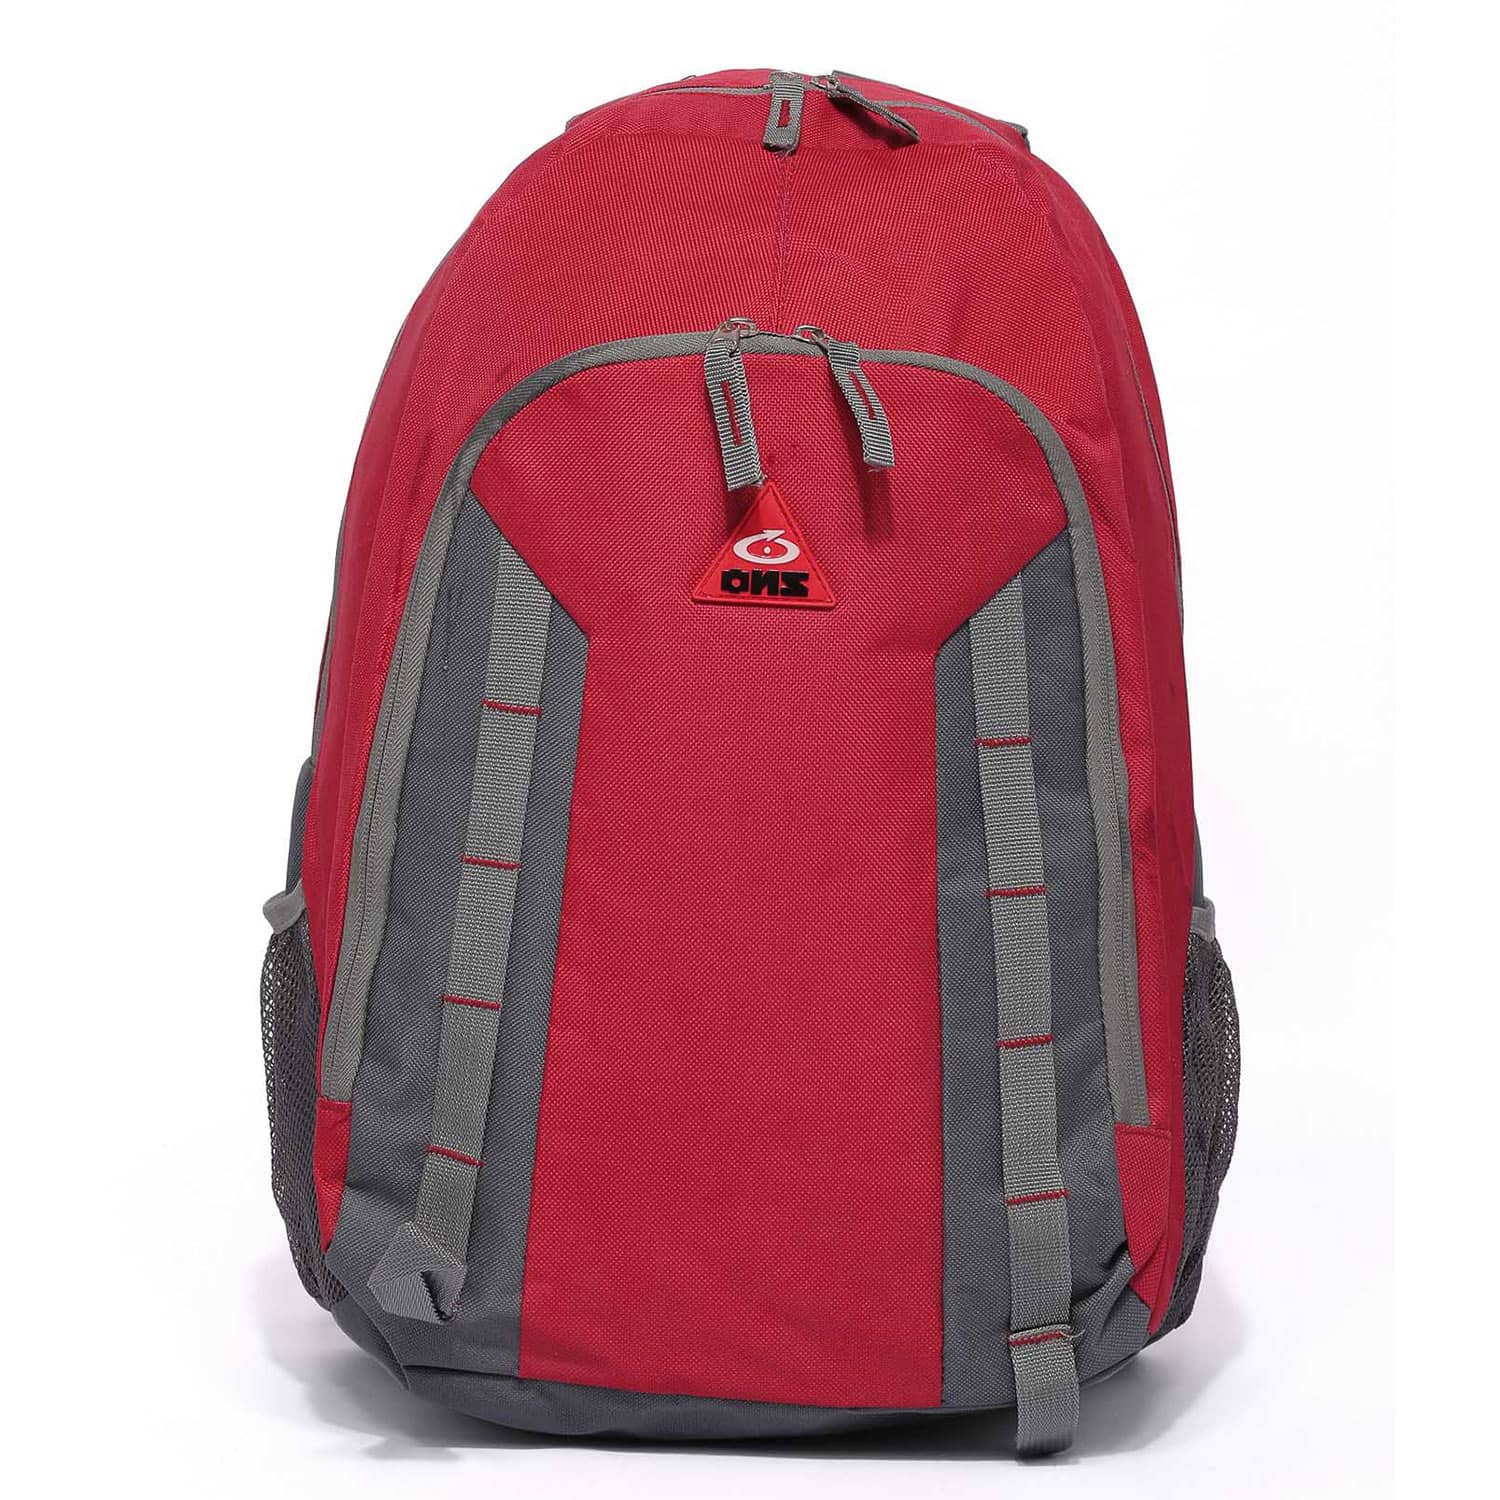 ONS Trial Bag Dark-Red-Green Price in Doha Qatar - Leading sports ...